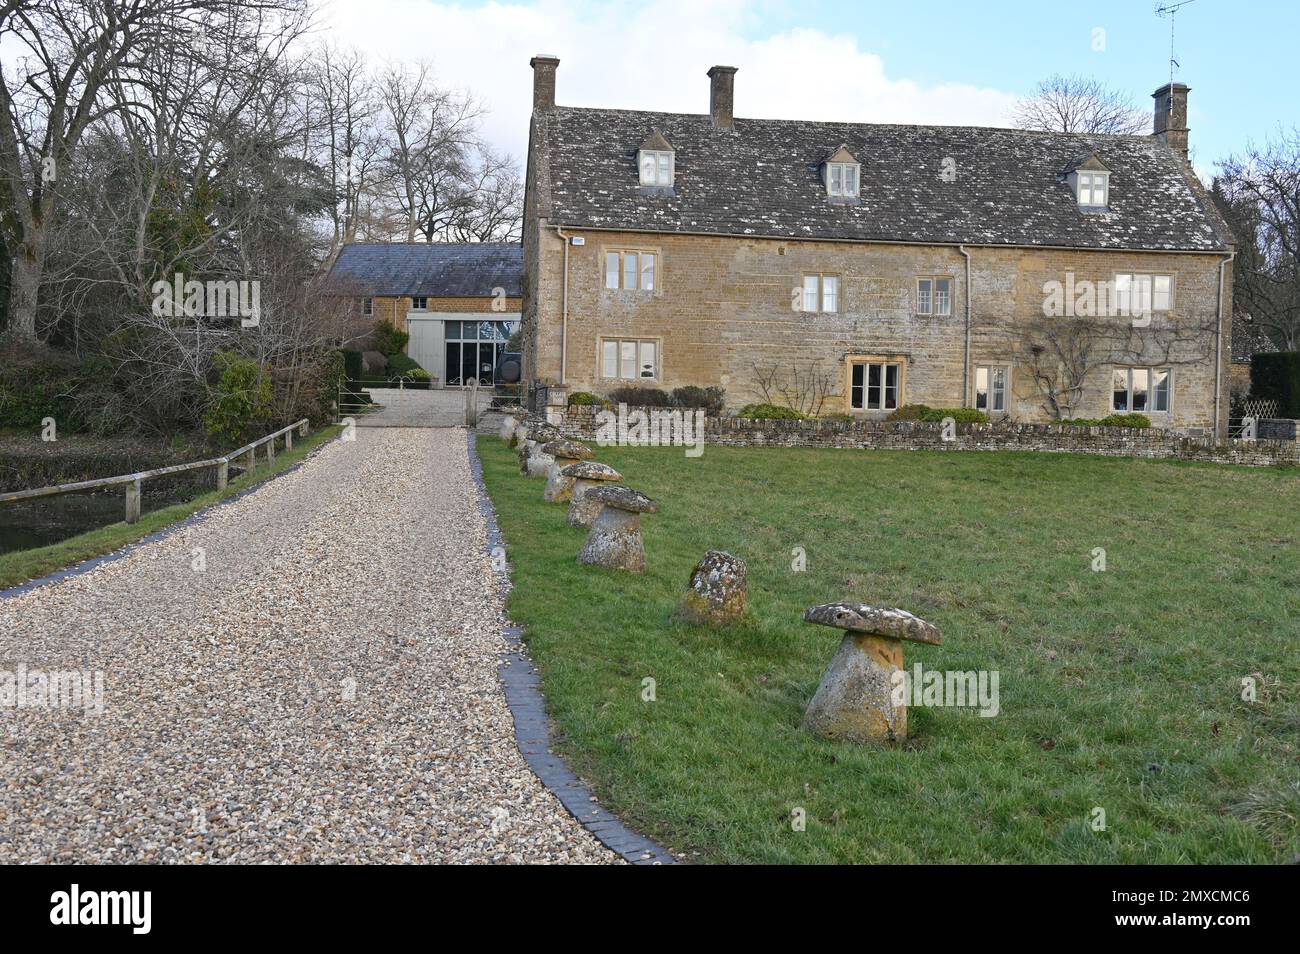 College Farm in the Cotswold village of Wyck Rissington, Gloucestershire has row of staddle stones as an ornamental decoration beside the driveway. Stock Photo